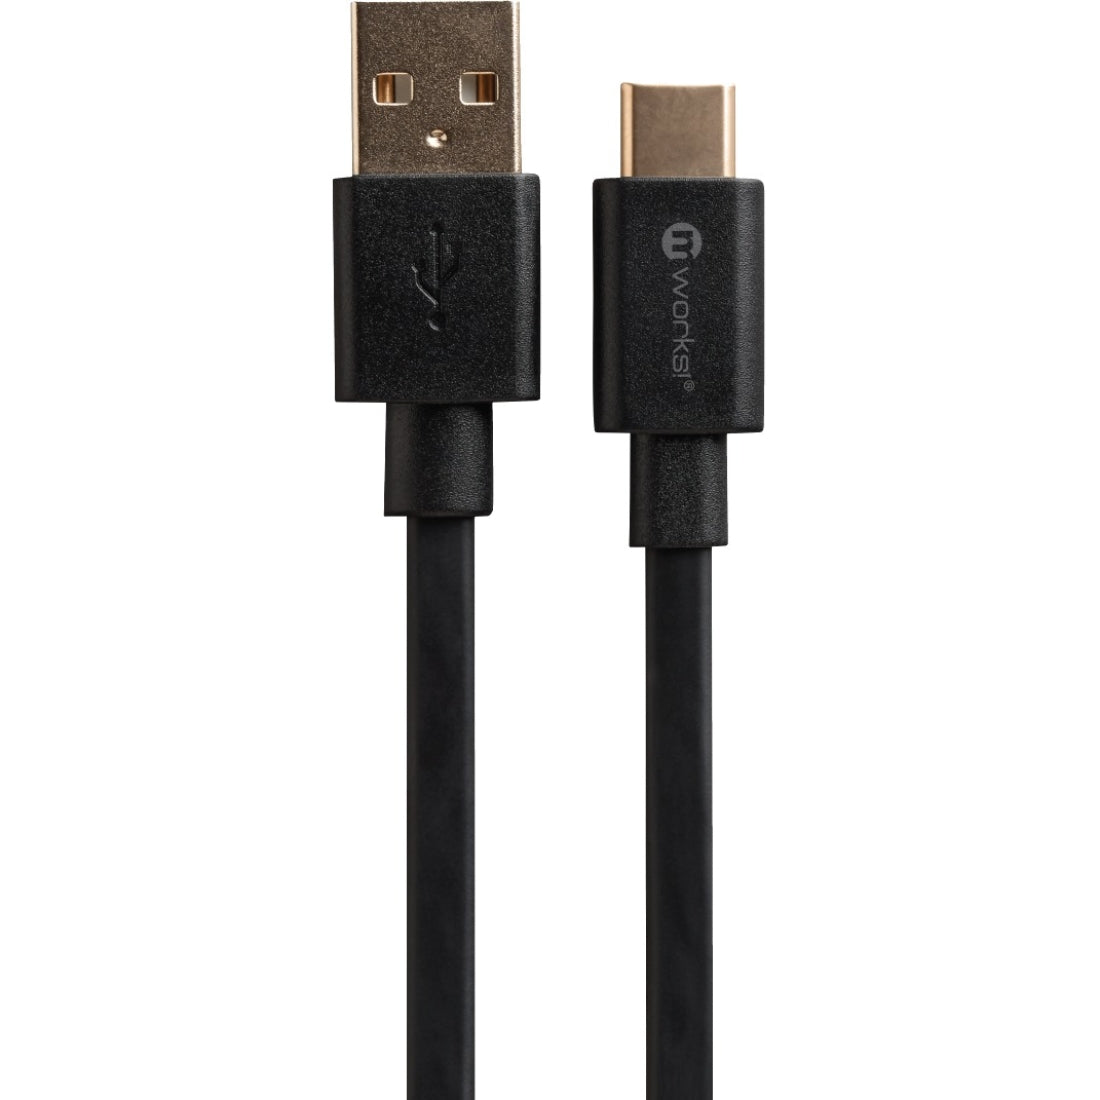 mworks! mPOWER! Flat Type-C Sync & Charge Cable 2.0 Meter Black